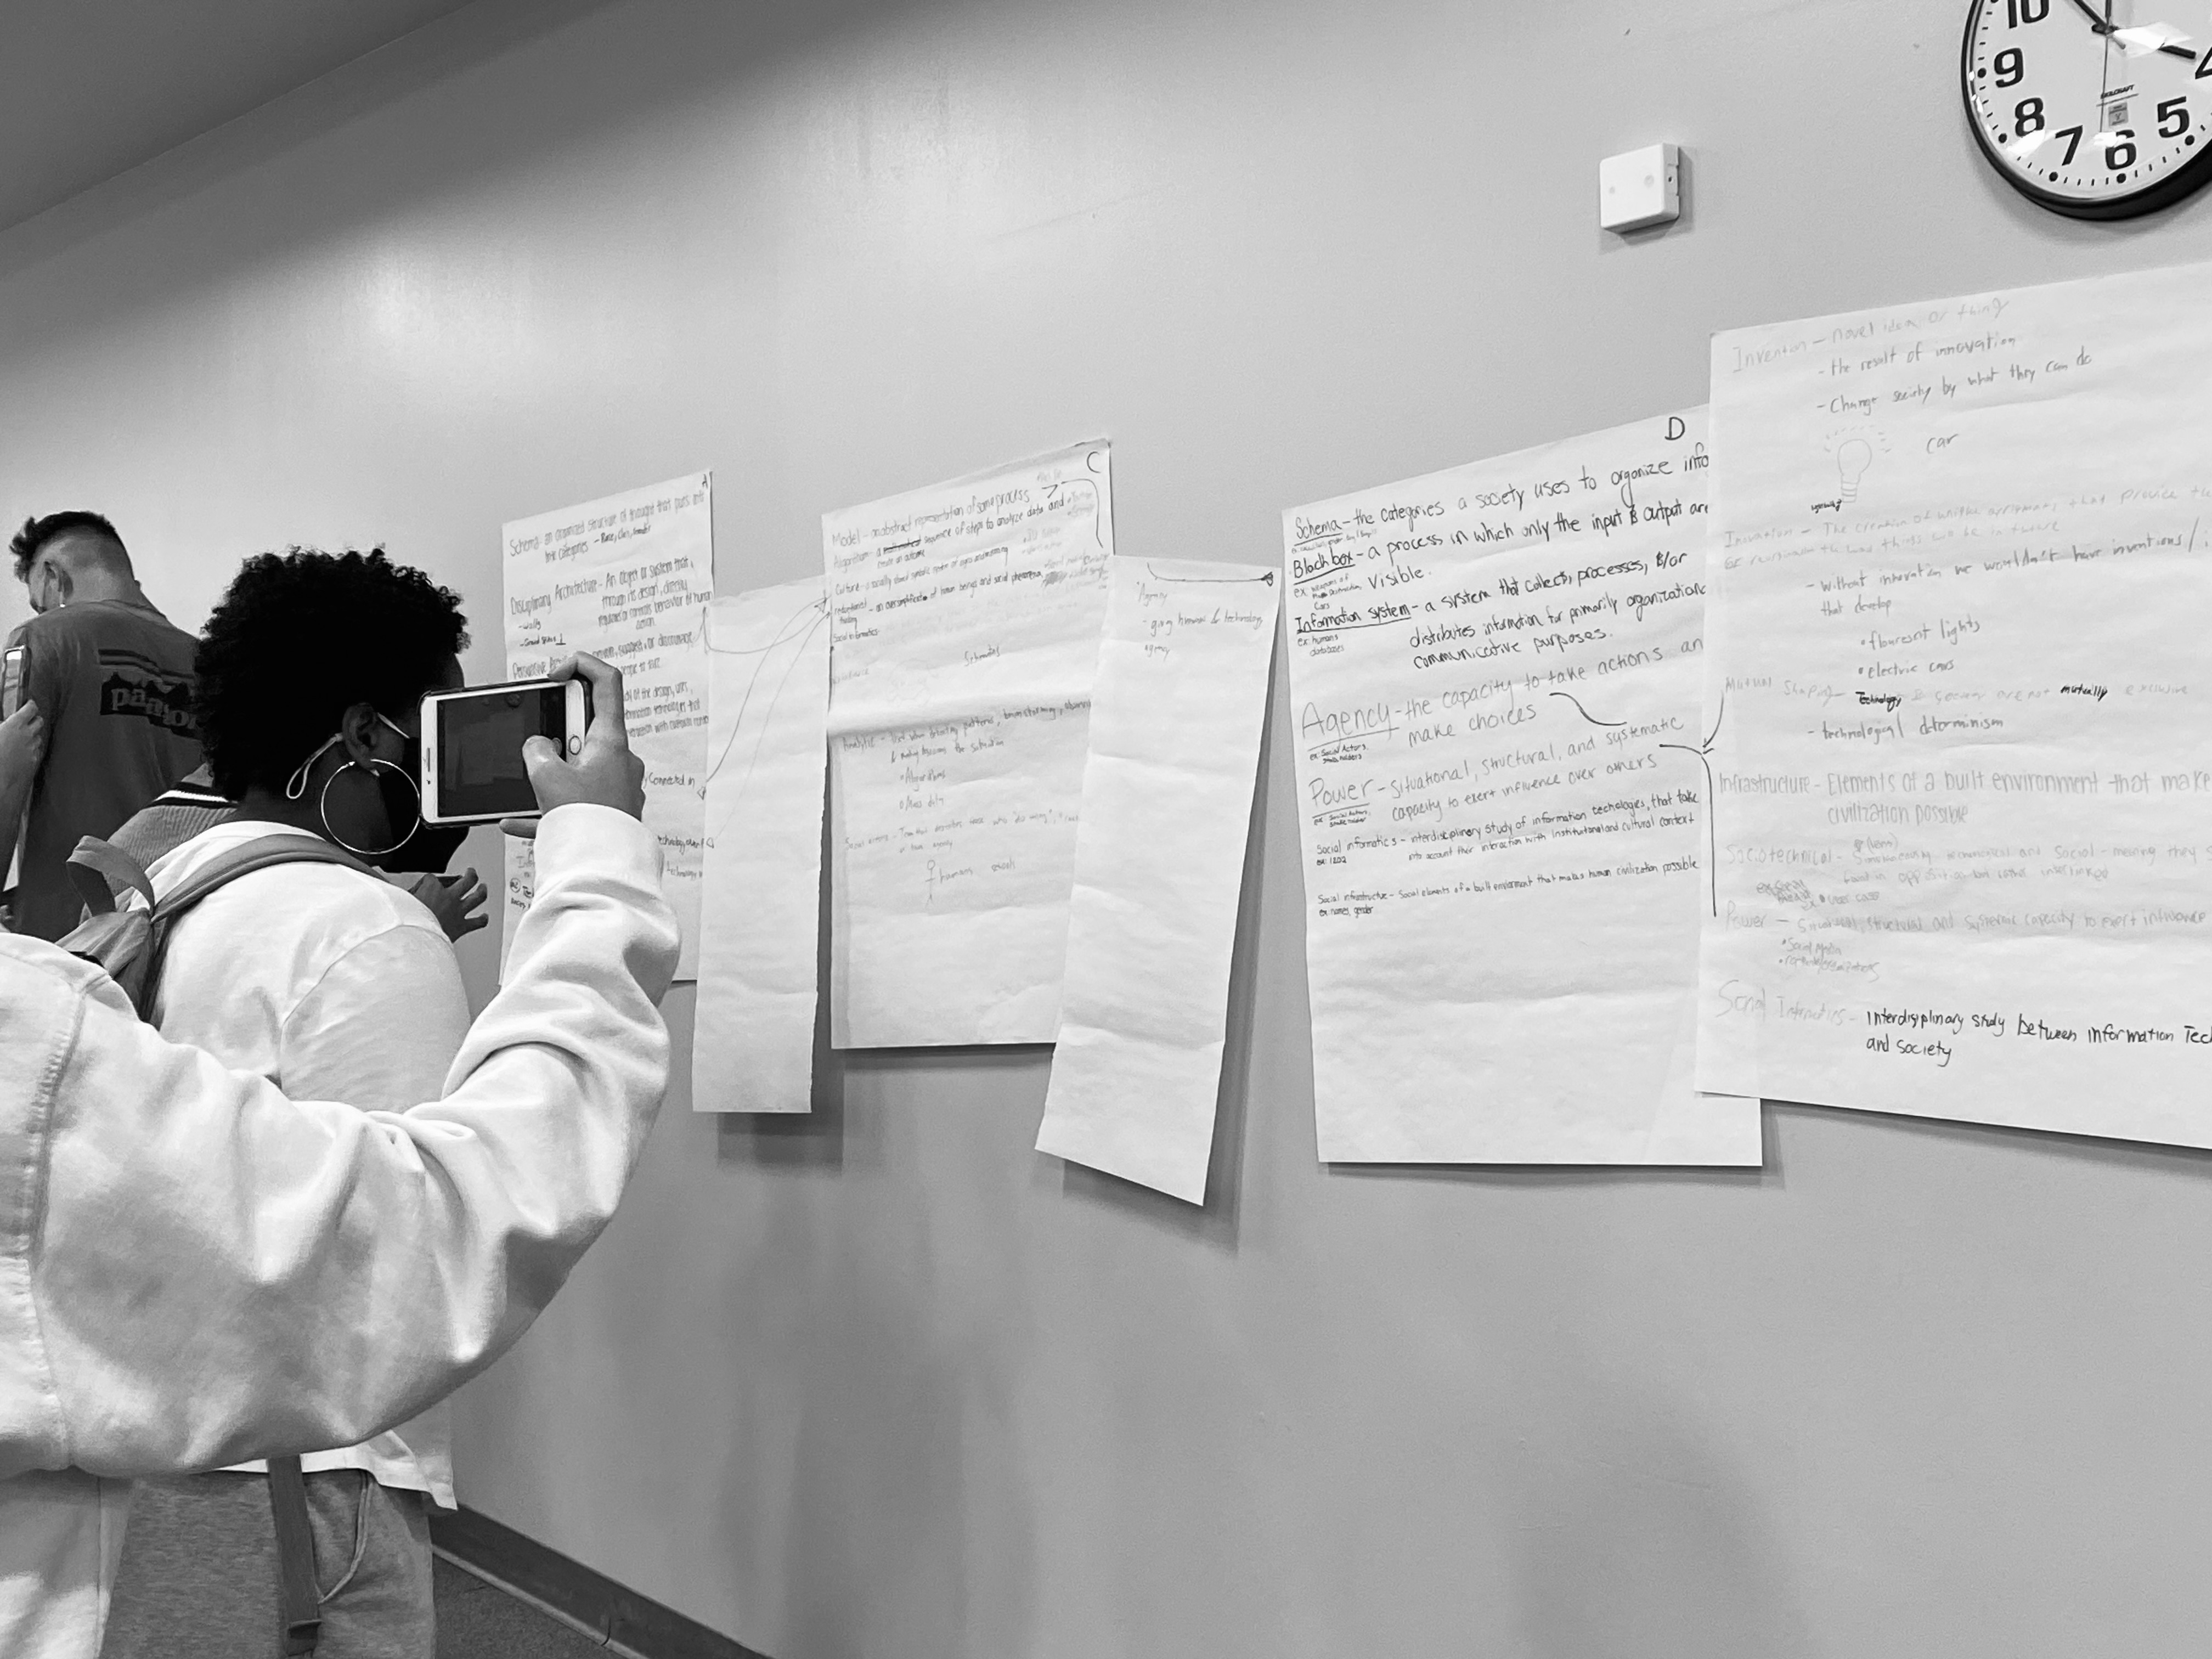 College students looking at large, poster sized pieces of paper stuck on a wall. The pieces of paper have hand written notes over them. A student is using a cell phone to take a picture of the notes.